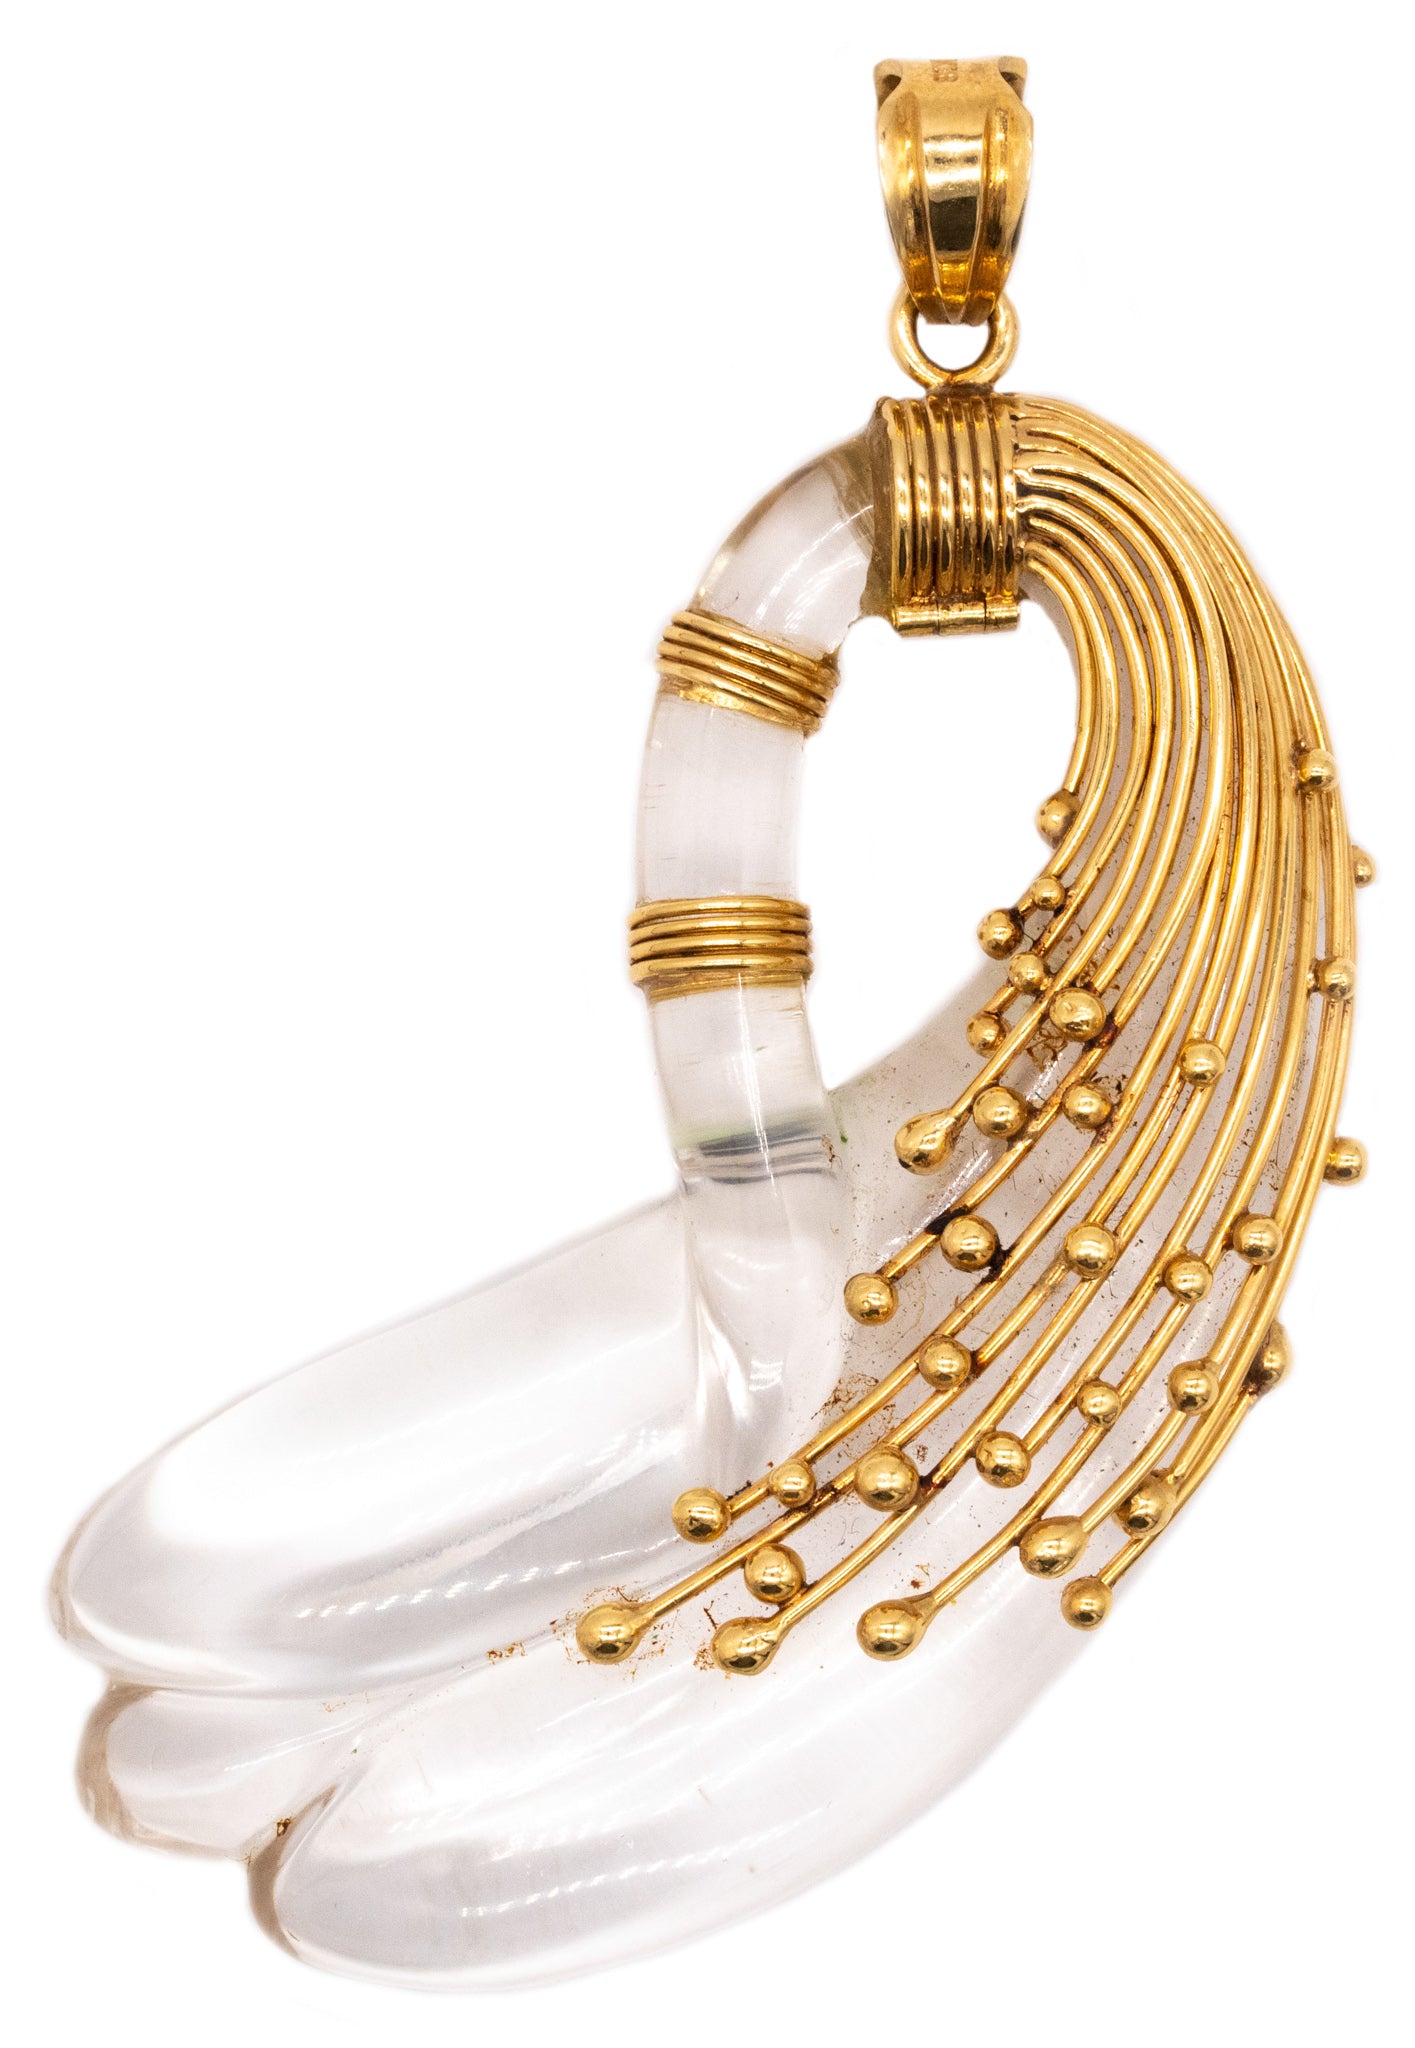 Sculptural Abstraction Of Swan Pendant In 18Kt Yellow Gold With Carved Rock Crystal